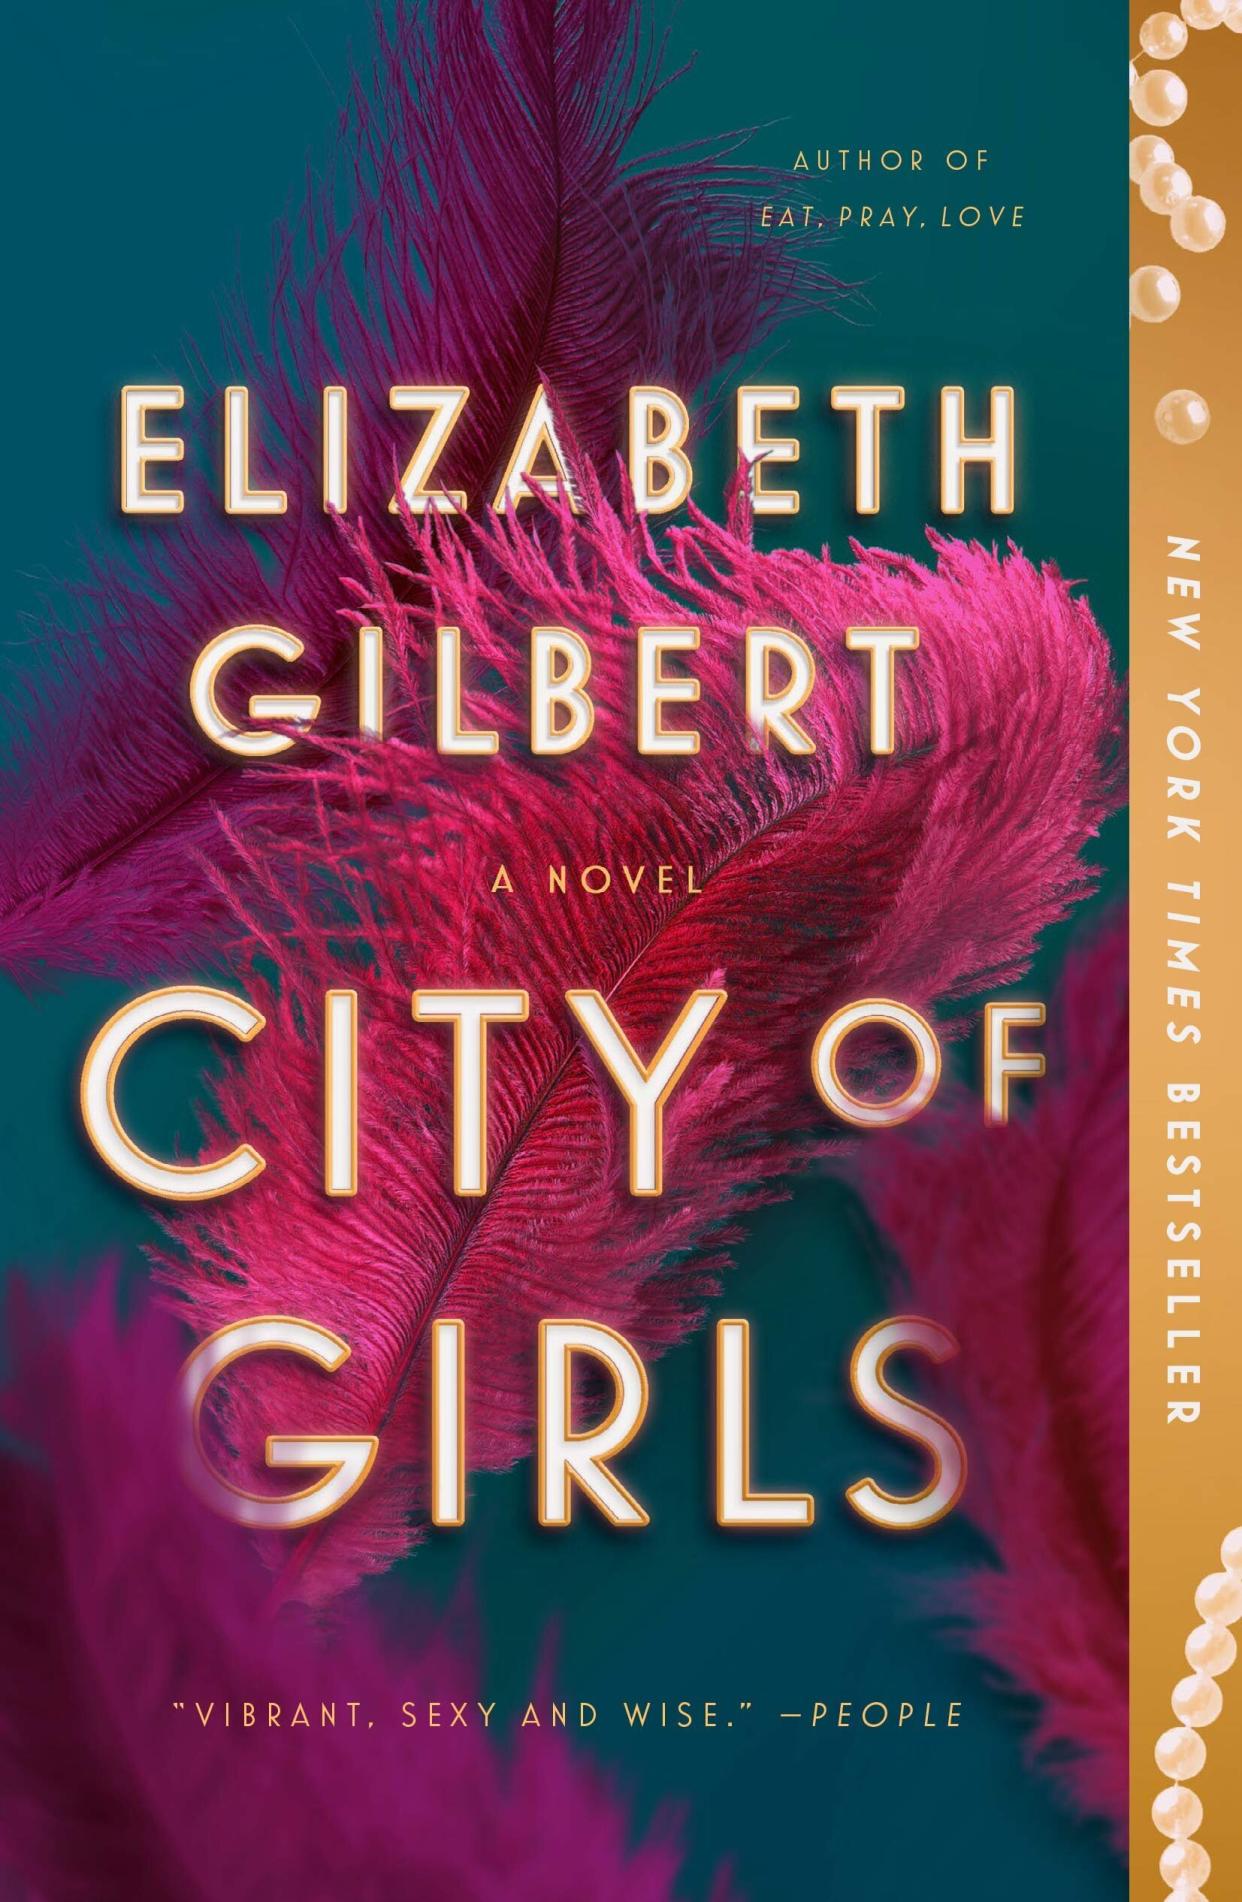 The "Eat, Pray, Love" author's latest novel from last year. "City Of Girls" is Vivian Morris' look back on her life when she was a young woman in 1940s and involved in New York City's theater world. <br /><br />You can read more about this book at <a href="https://www.goodreads.com/book/show/42135029-city-of-girls" target="_blank" rel="noopener noreferrer">Goodreads</a> and find it for $14 at <a href="https://amzn.to/2MonFZJ" target="_blank" rel="noopener noreferrer">Amazon</a>.